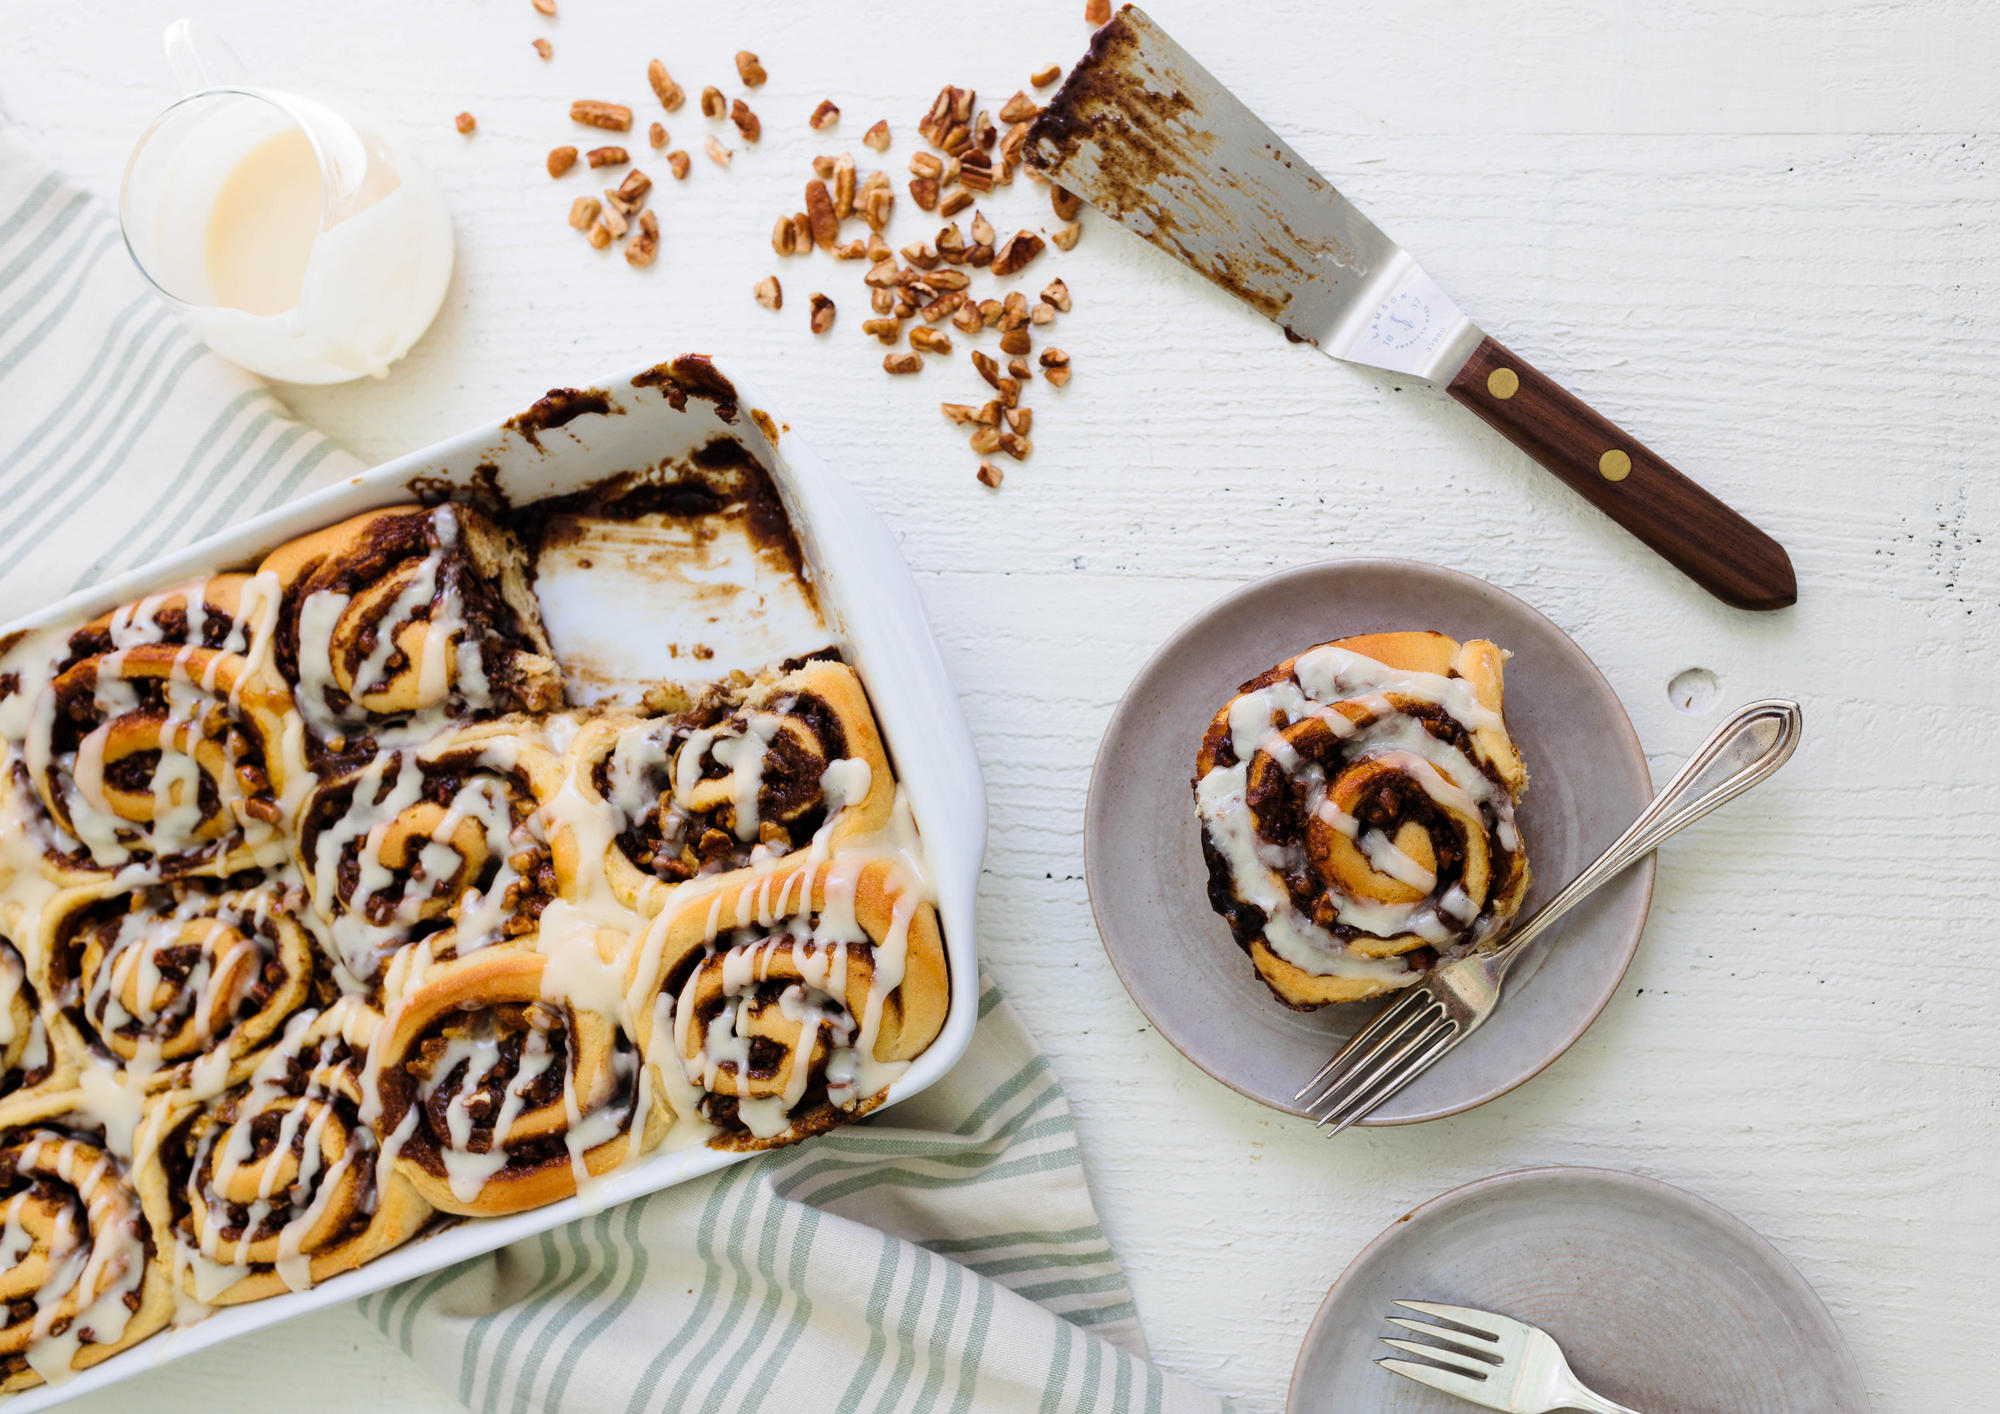 Inside-Out Pecan Sticky Buns with Sorghum Glaze